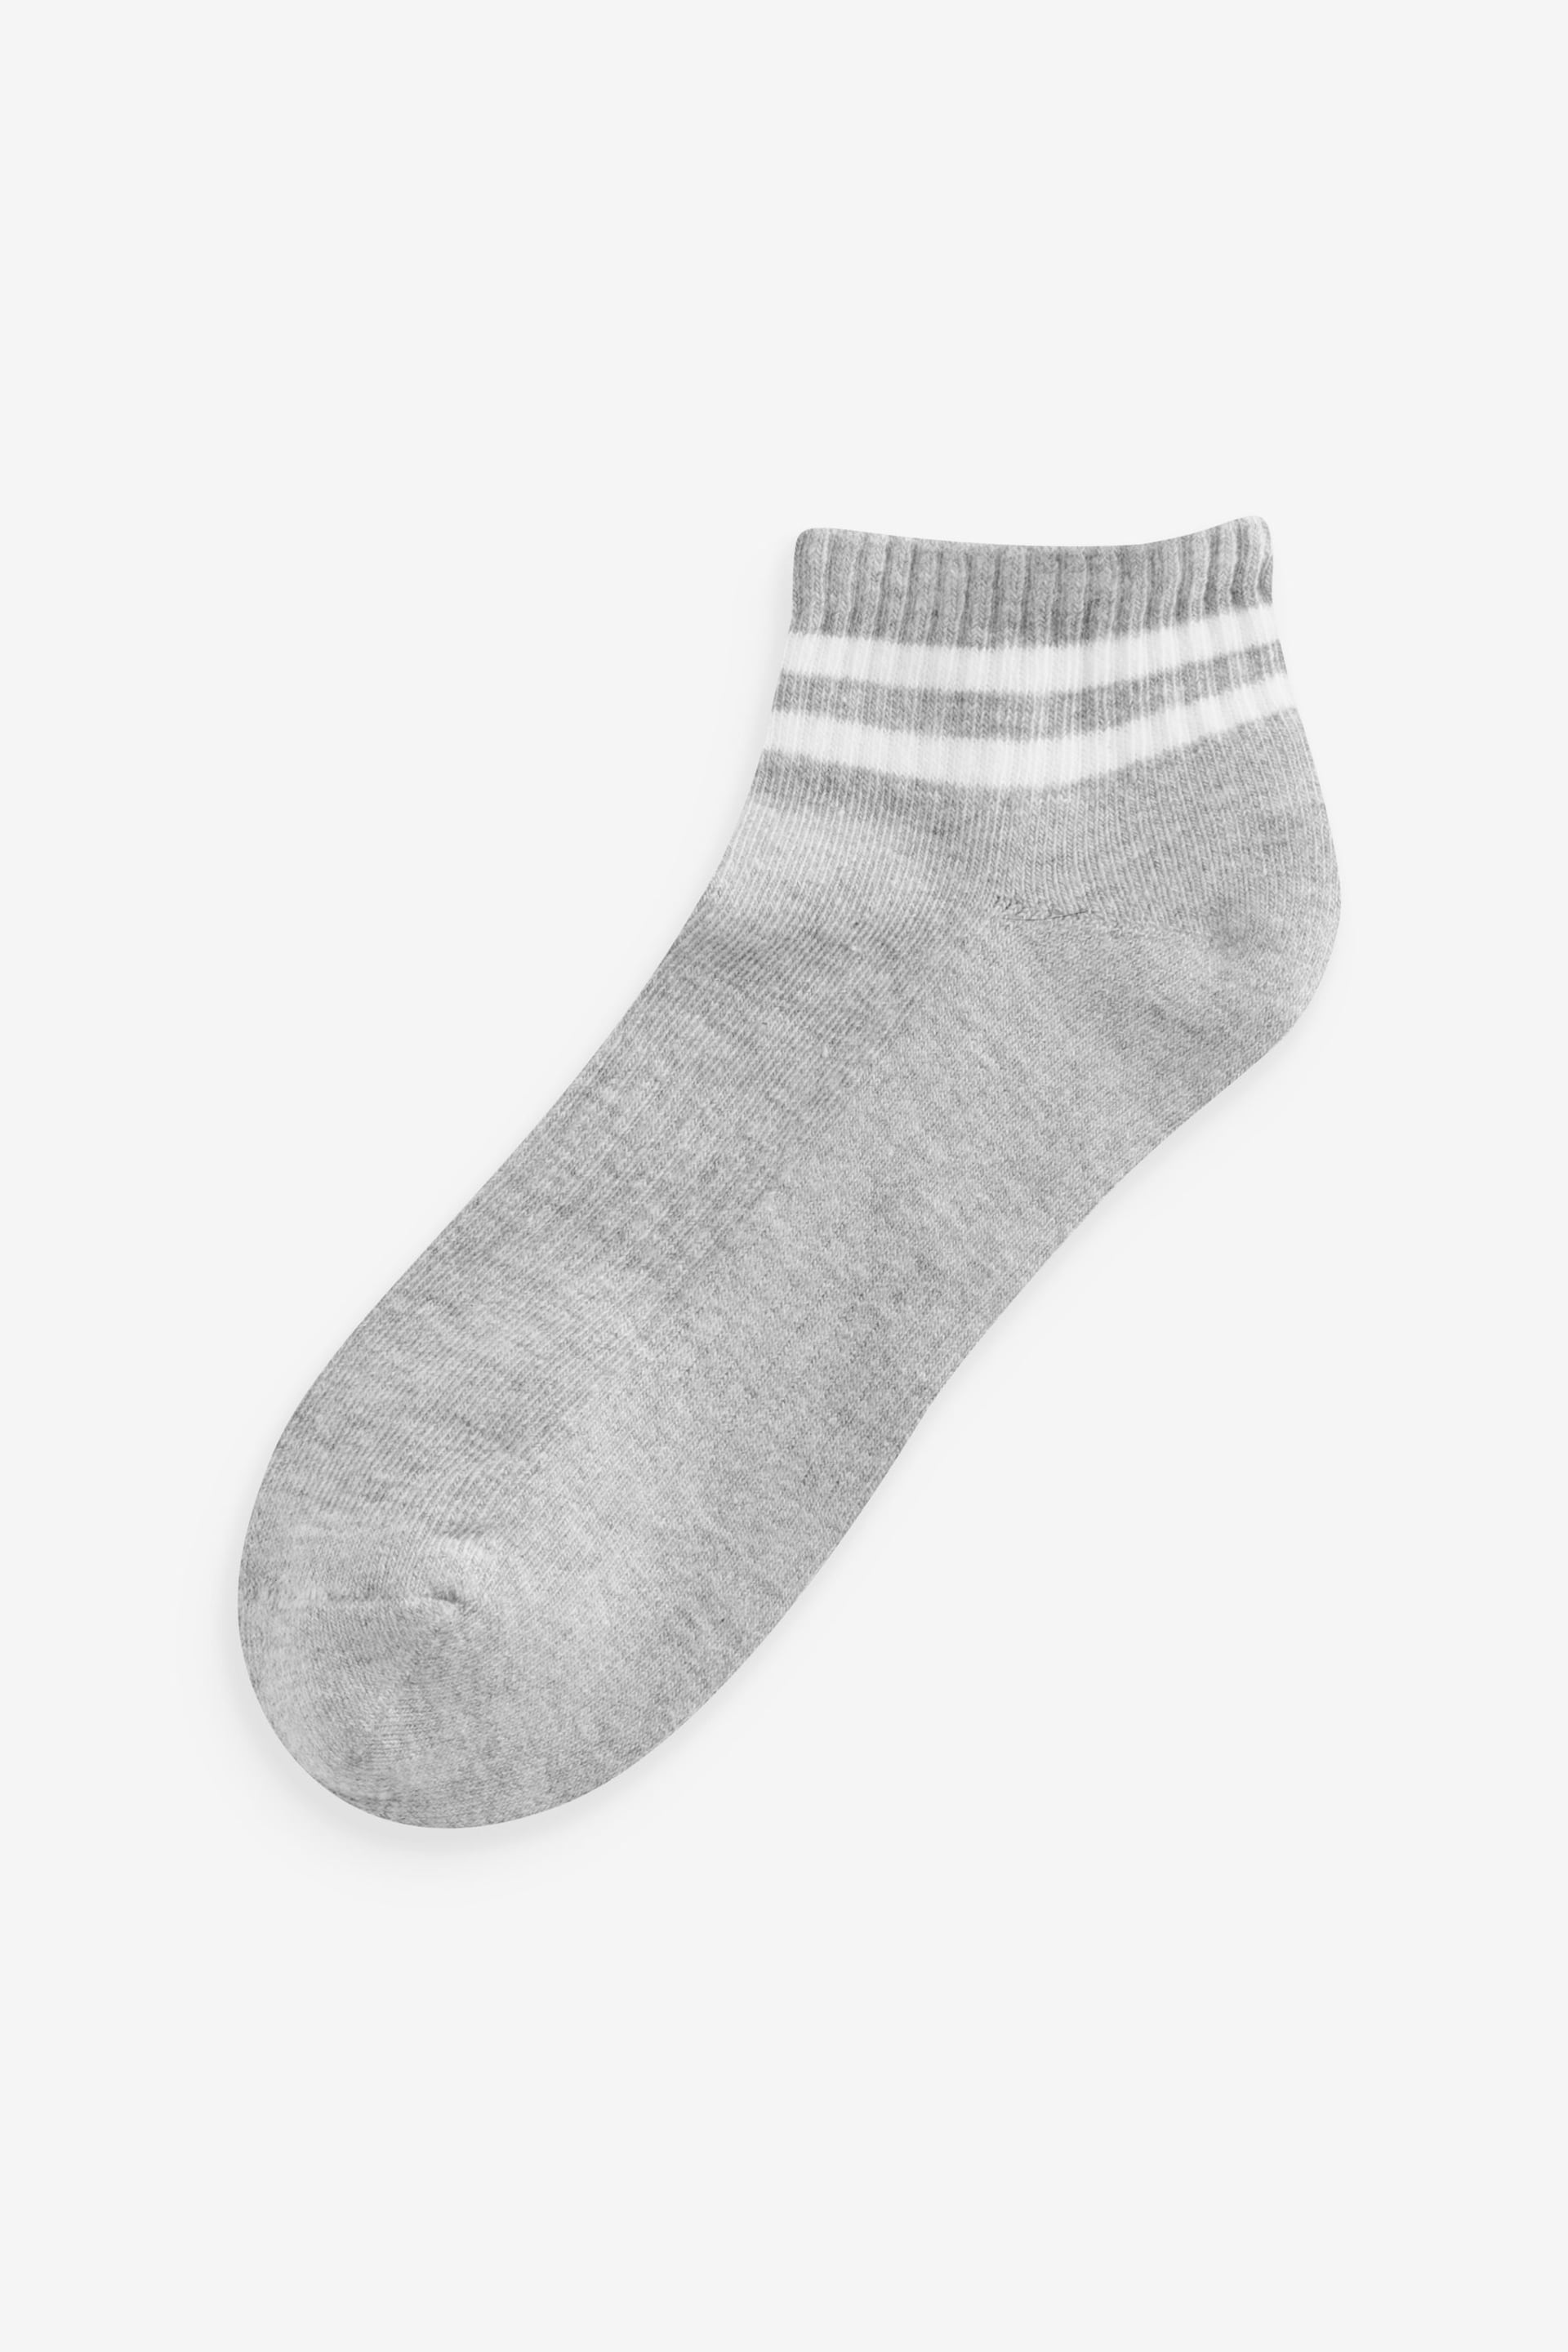 Grey/Blue/Green Stripe Cushion Sole Trainers Socks 3 Pack With Arch Support - Image 4 of 4